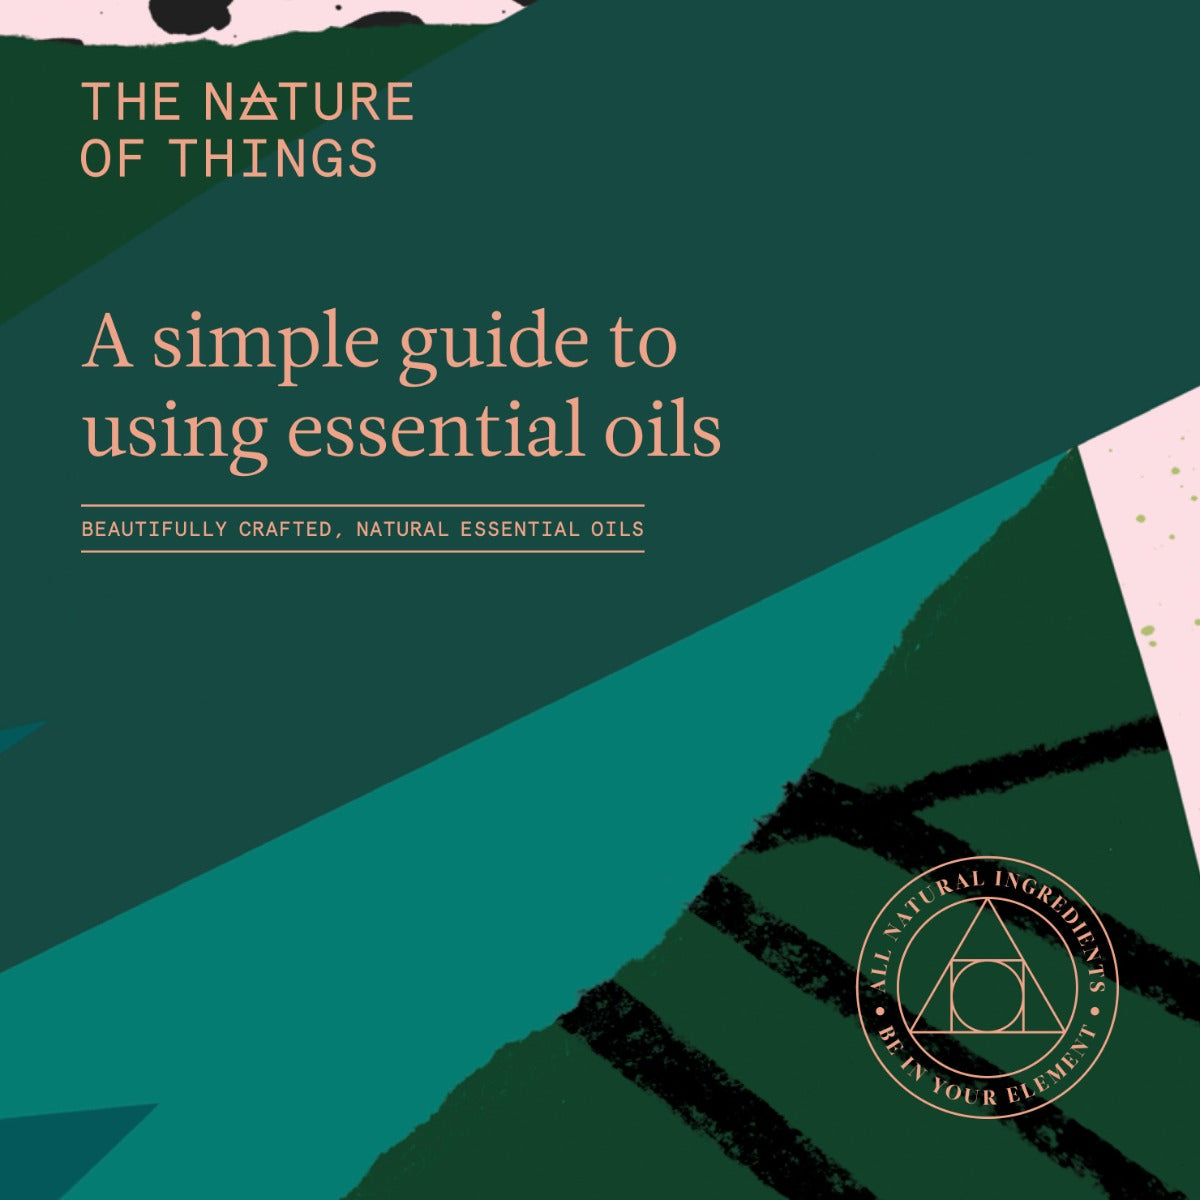 Simple Guiide to Essential Oils from The Nature of Things